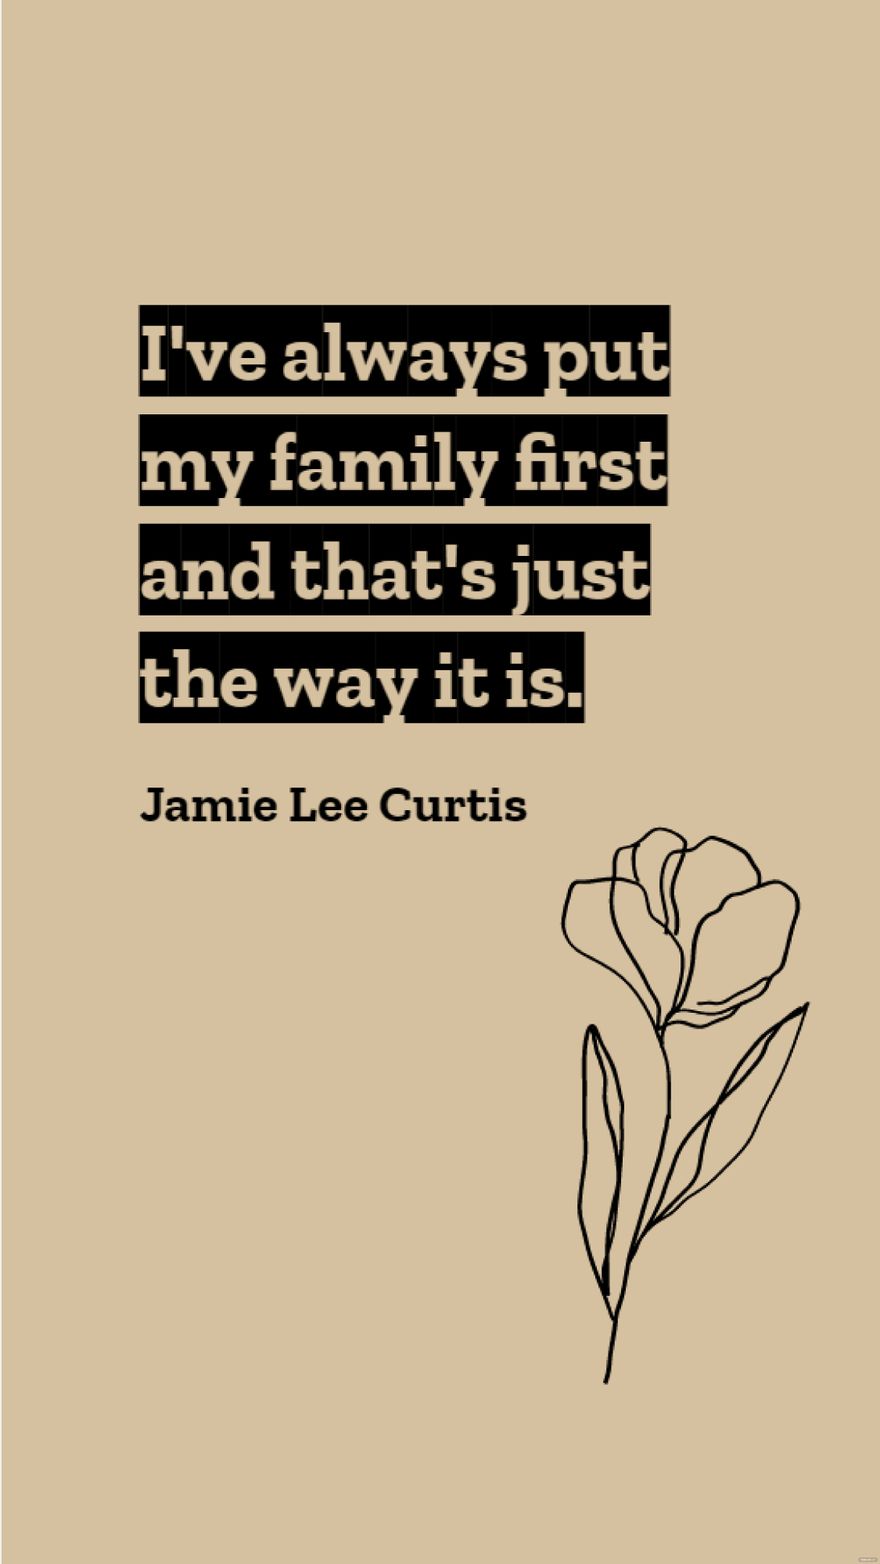 Free Jamie Lee Curtis - I've always put my family first and that's just the way it is. in JPG